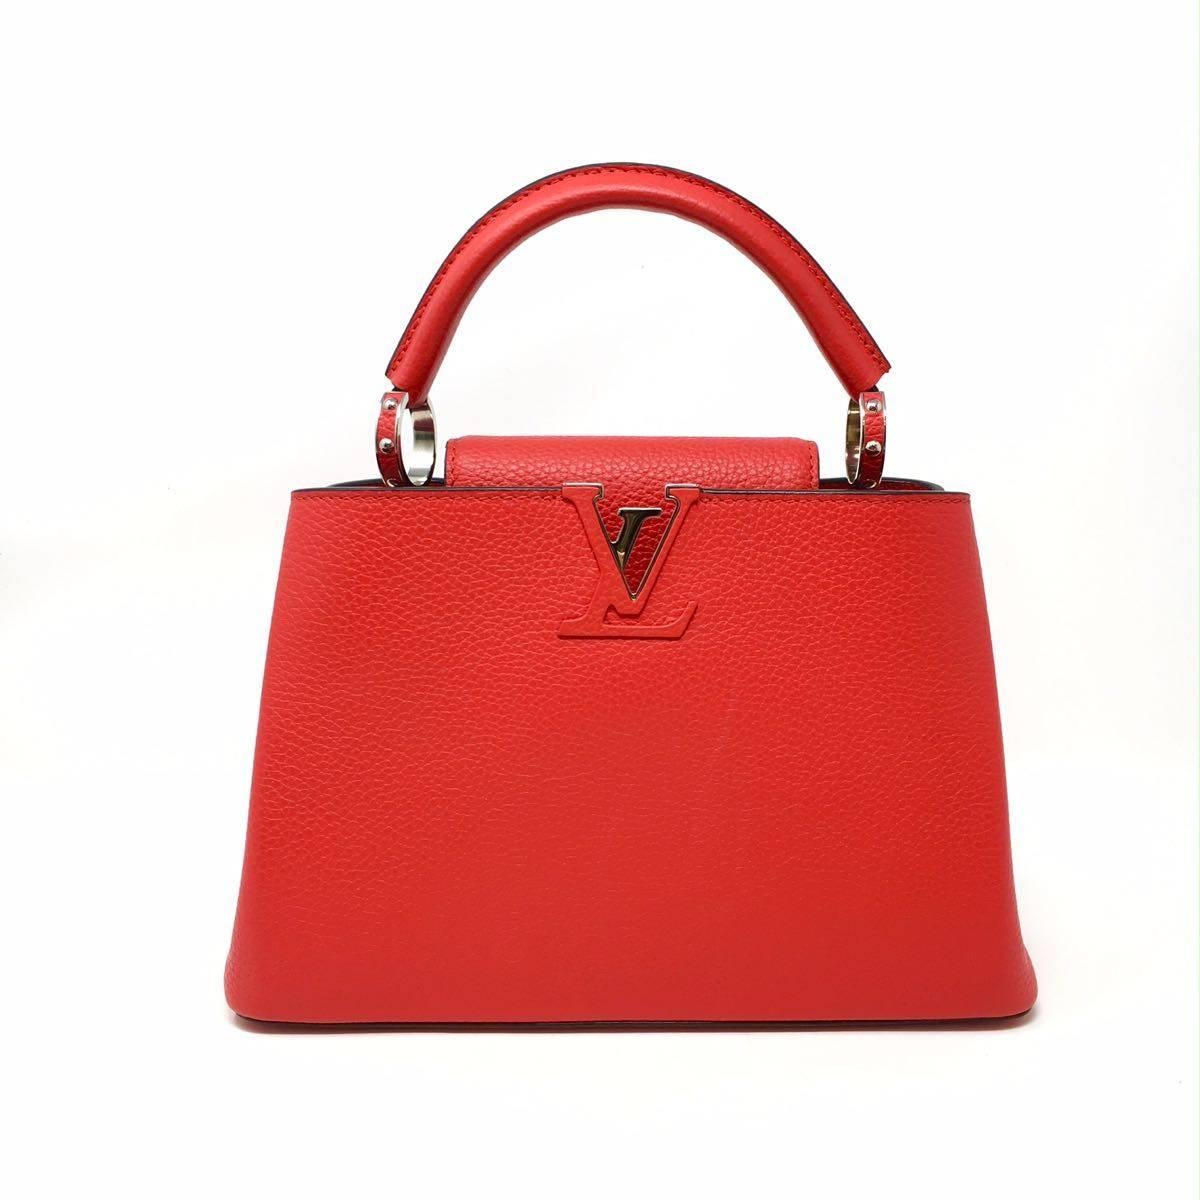 Capucine BB Bag Louis Vuitton veau taurillon coquelicot leather,
 in very good condition inside strap shoulder bag, hdw silver , dust bag included. 
Dimensions 27.0 x 20.0 x 9.0 cm